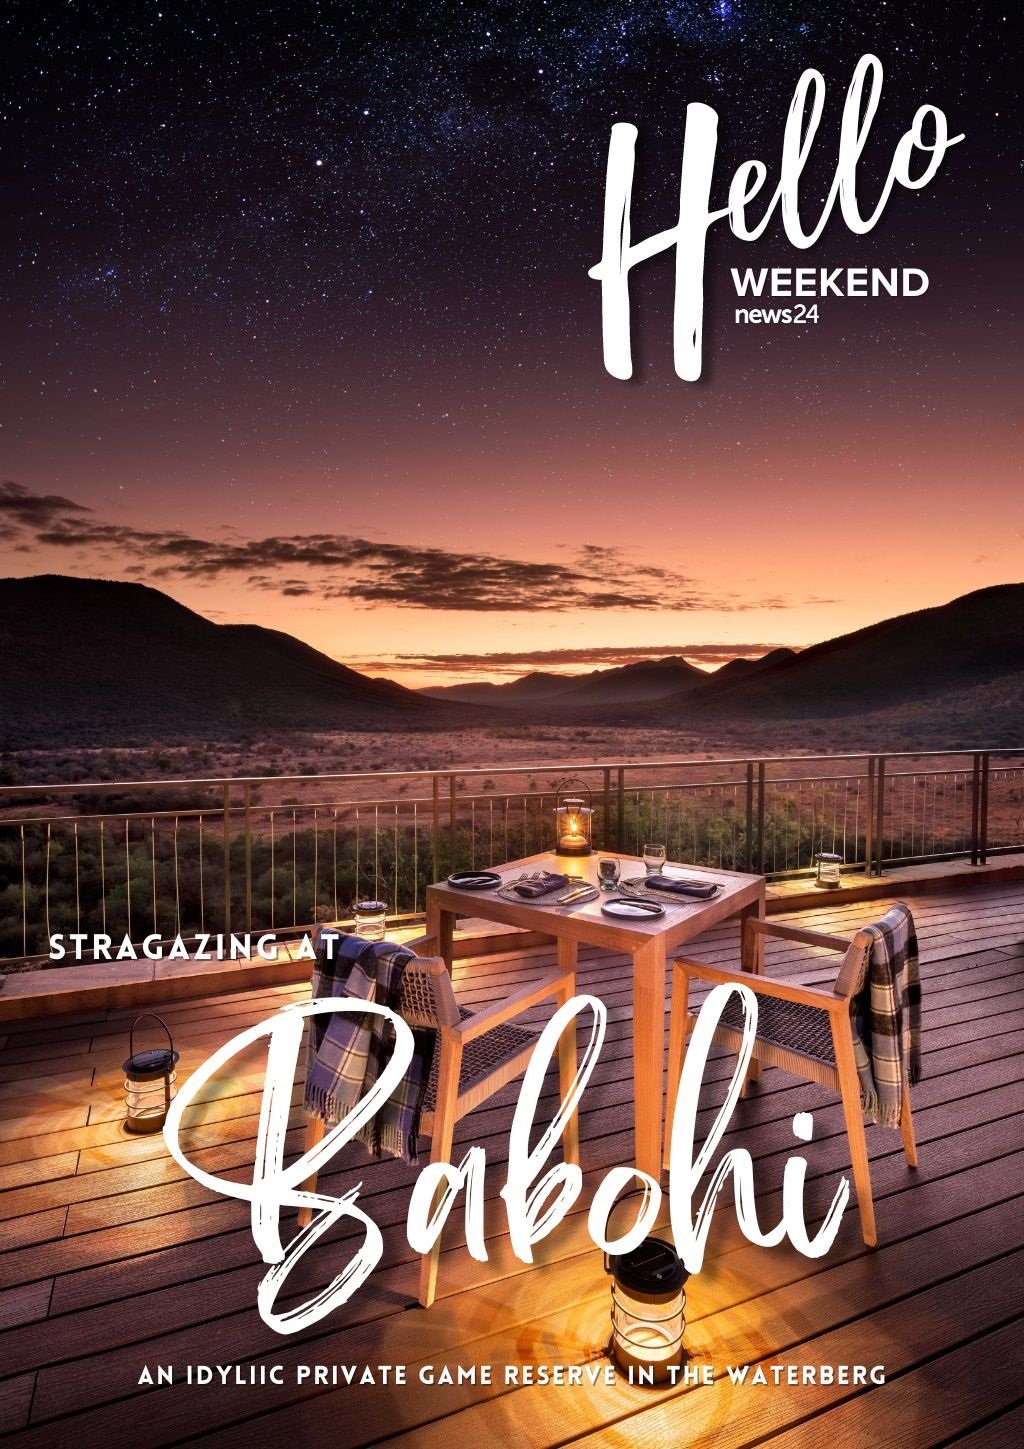 HELLO WEEKEND | Stargazing at adults-only private game reserve Babohi | Life